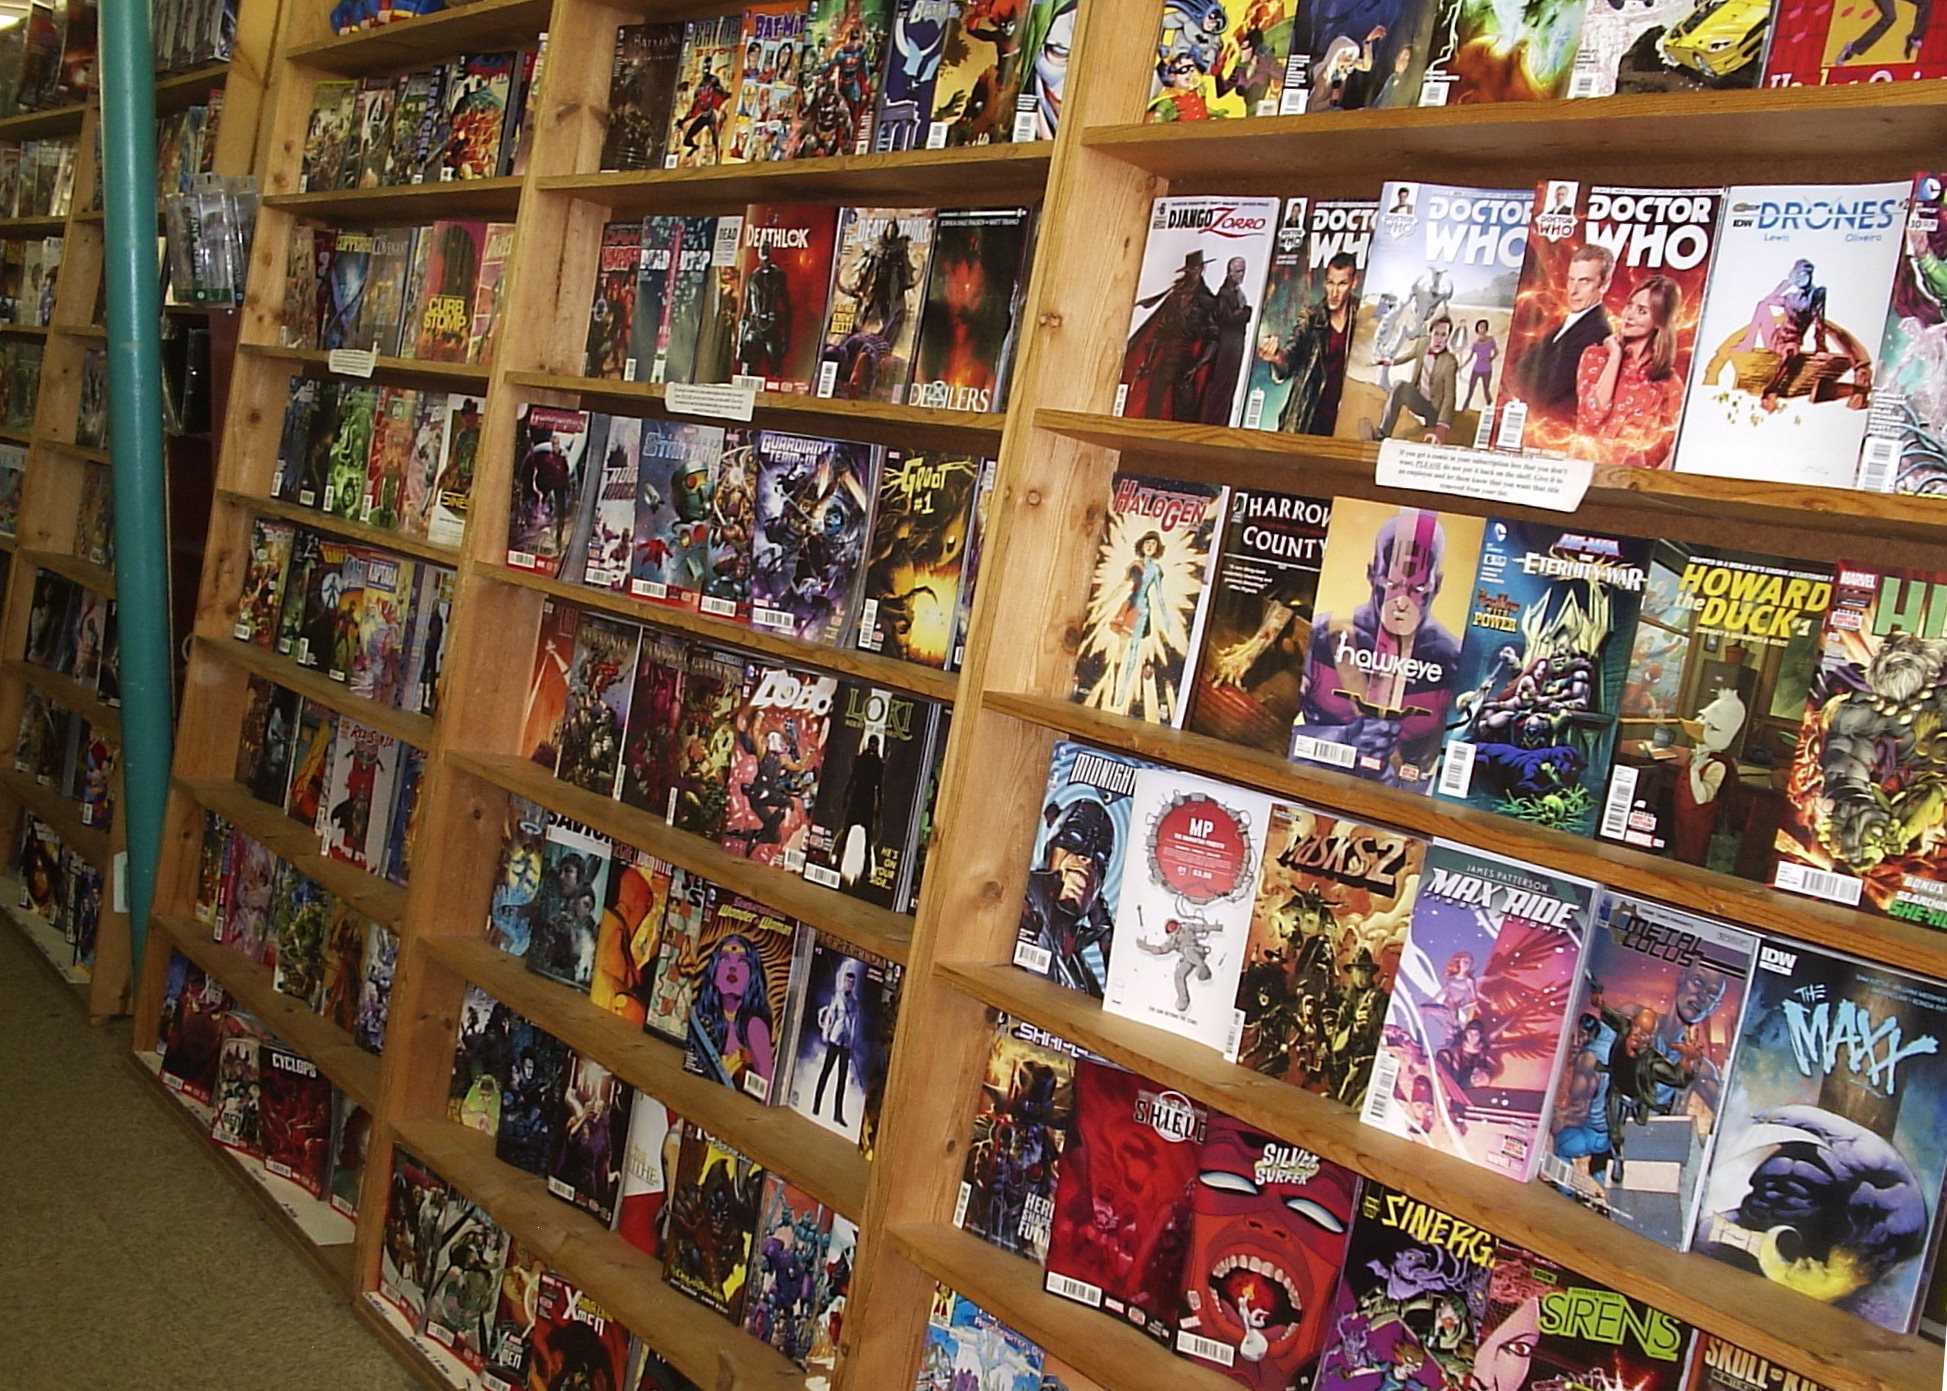 Augusta comic book stores credit variety, service, fandom for success